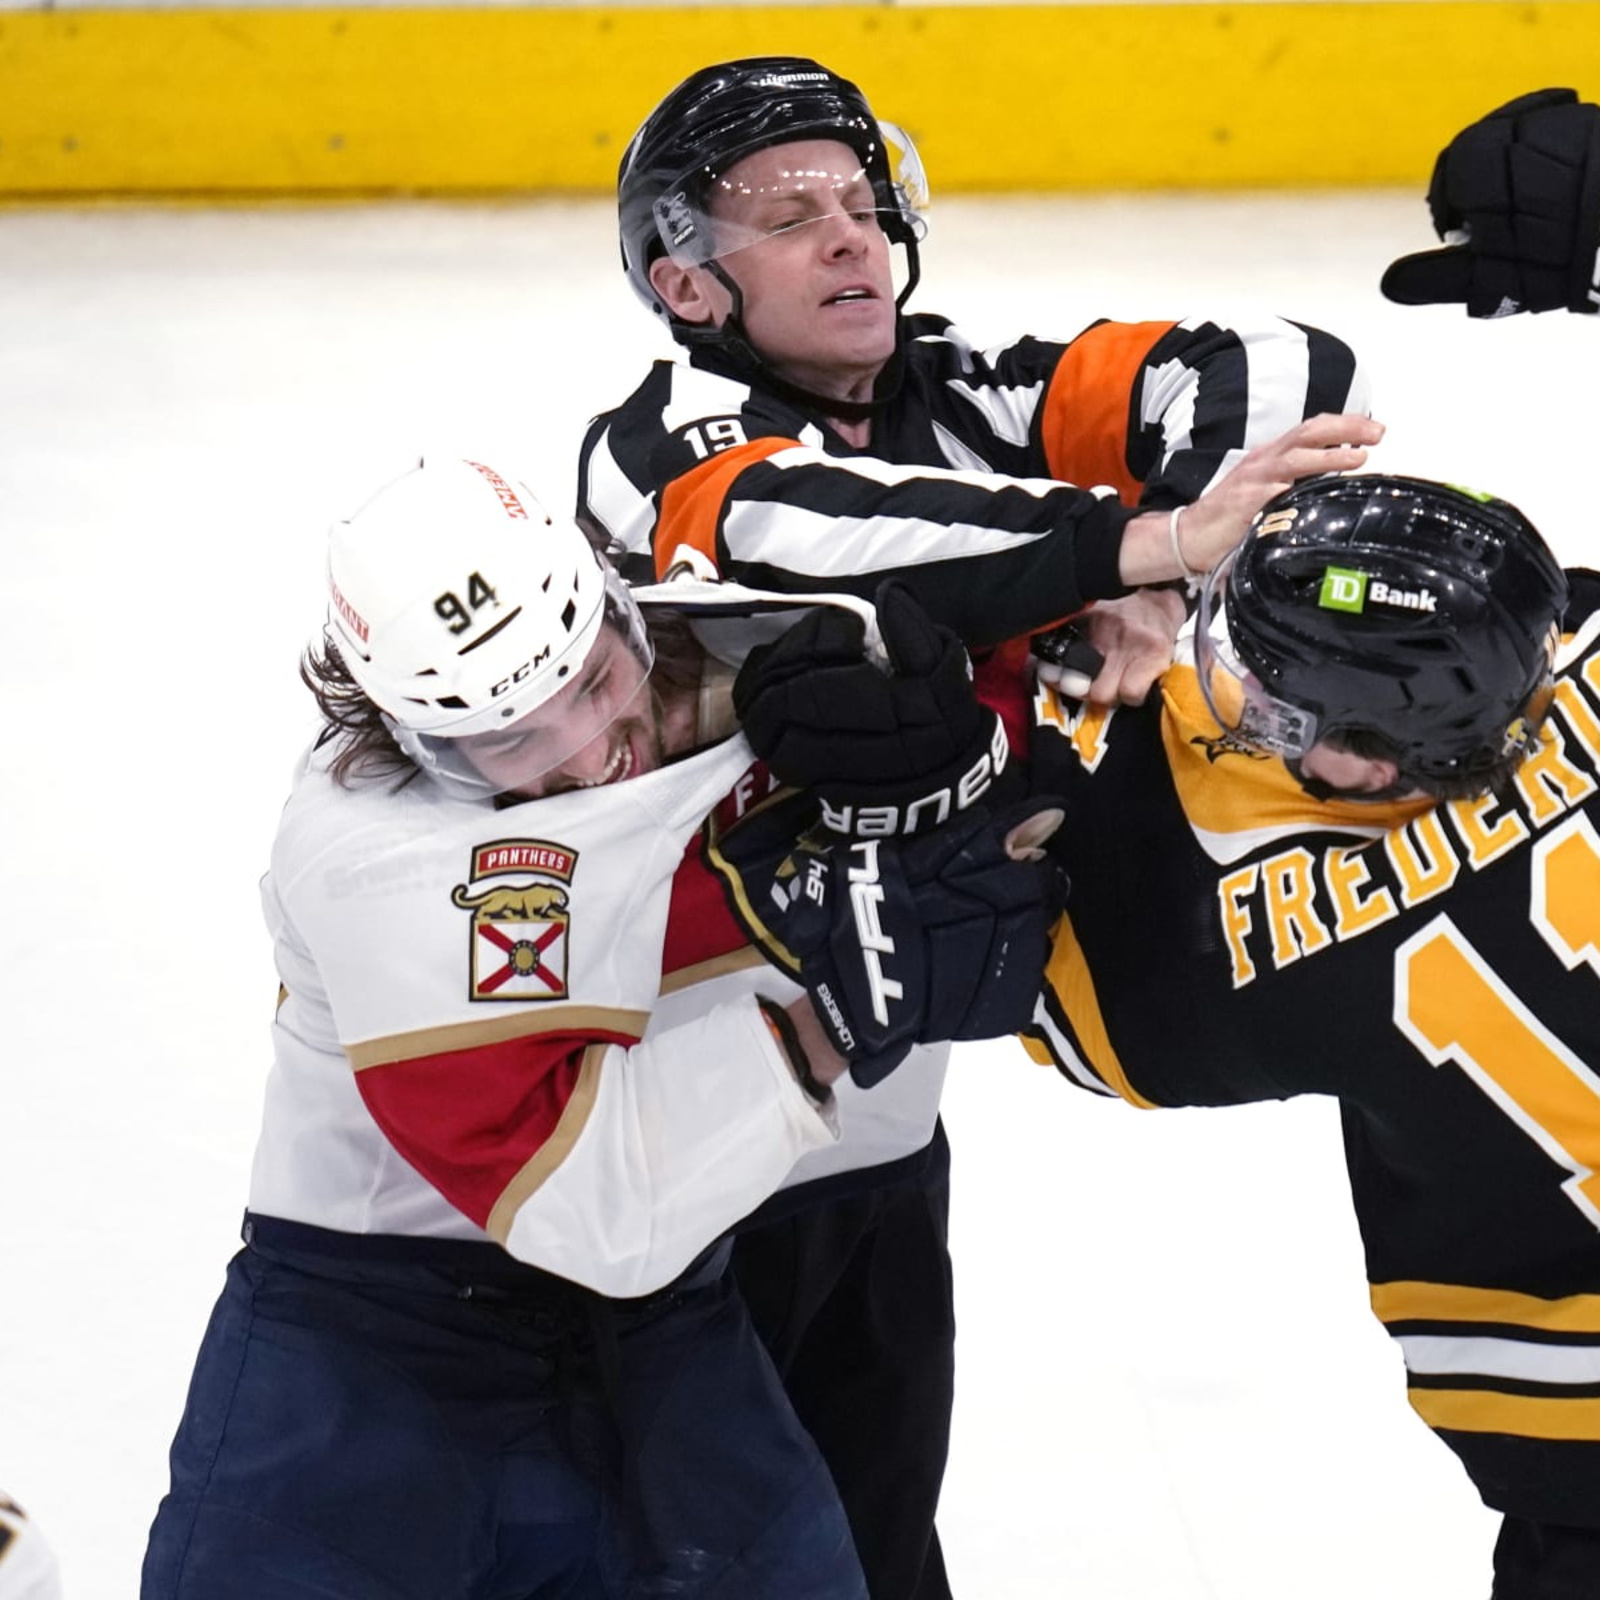 Trent Frederic: Bruins rookie's big fight in NHL debut thrills parents